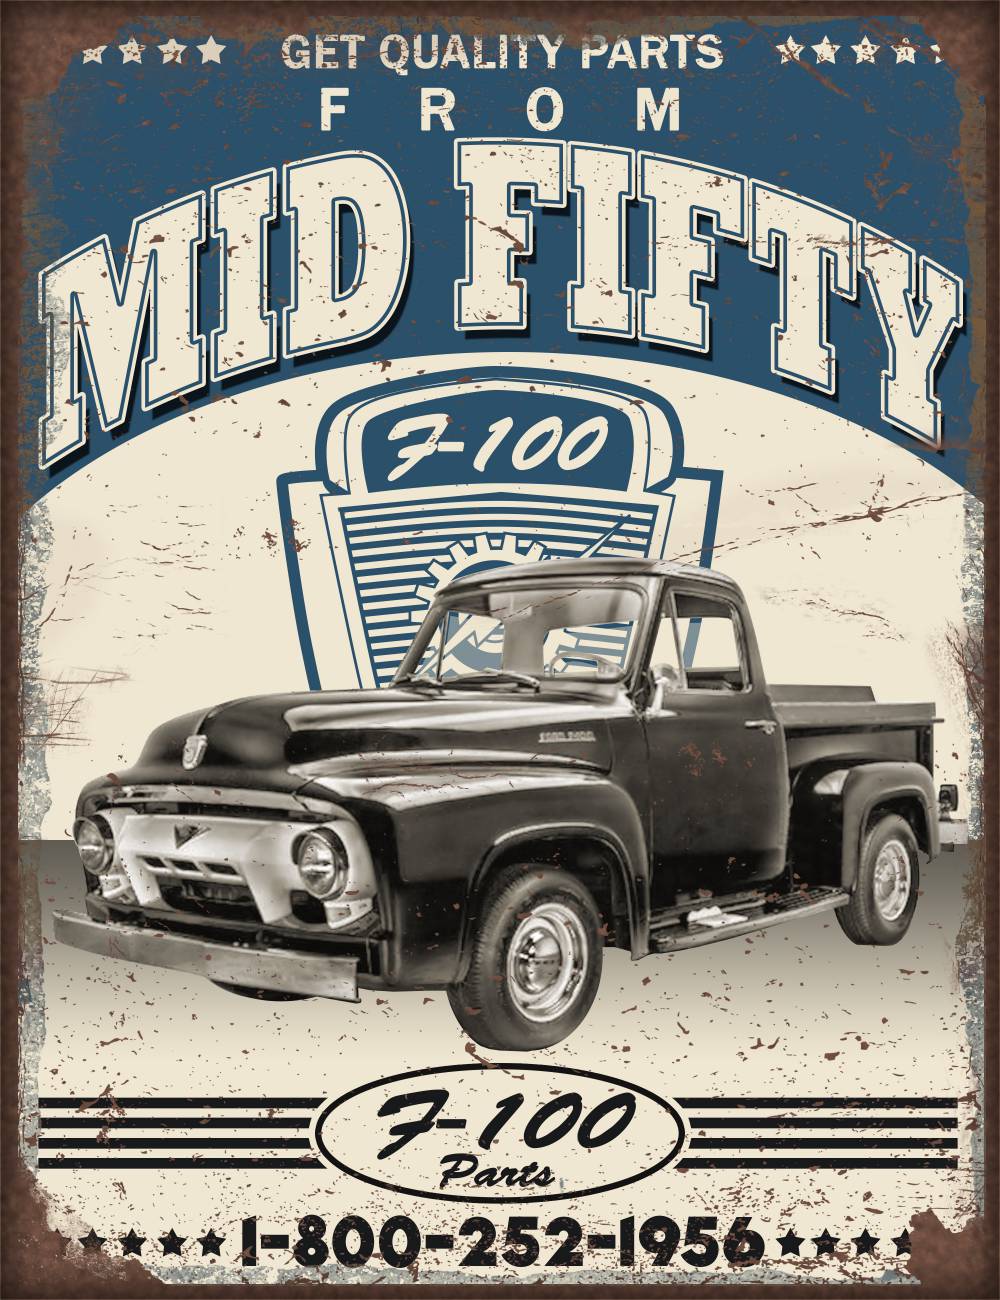 Mid fifty ford